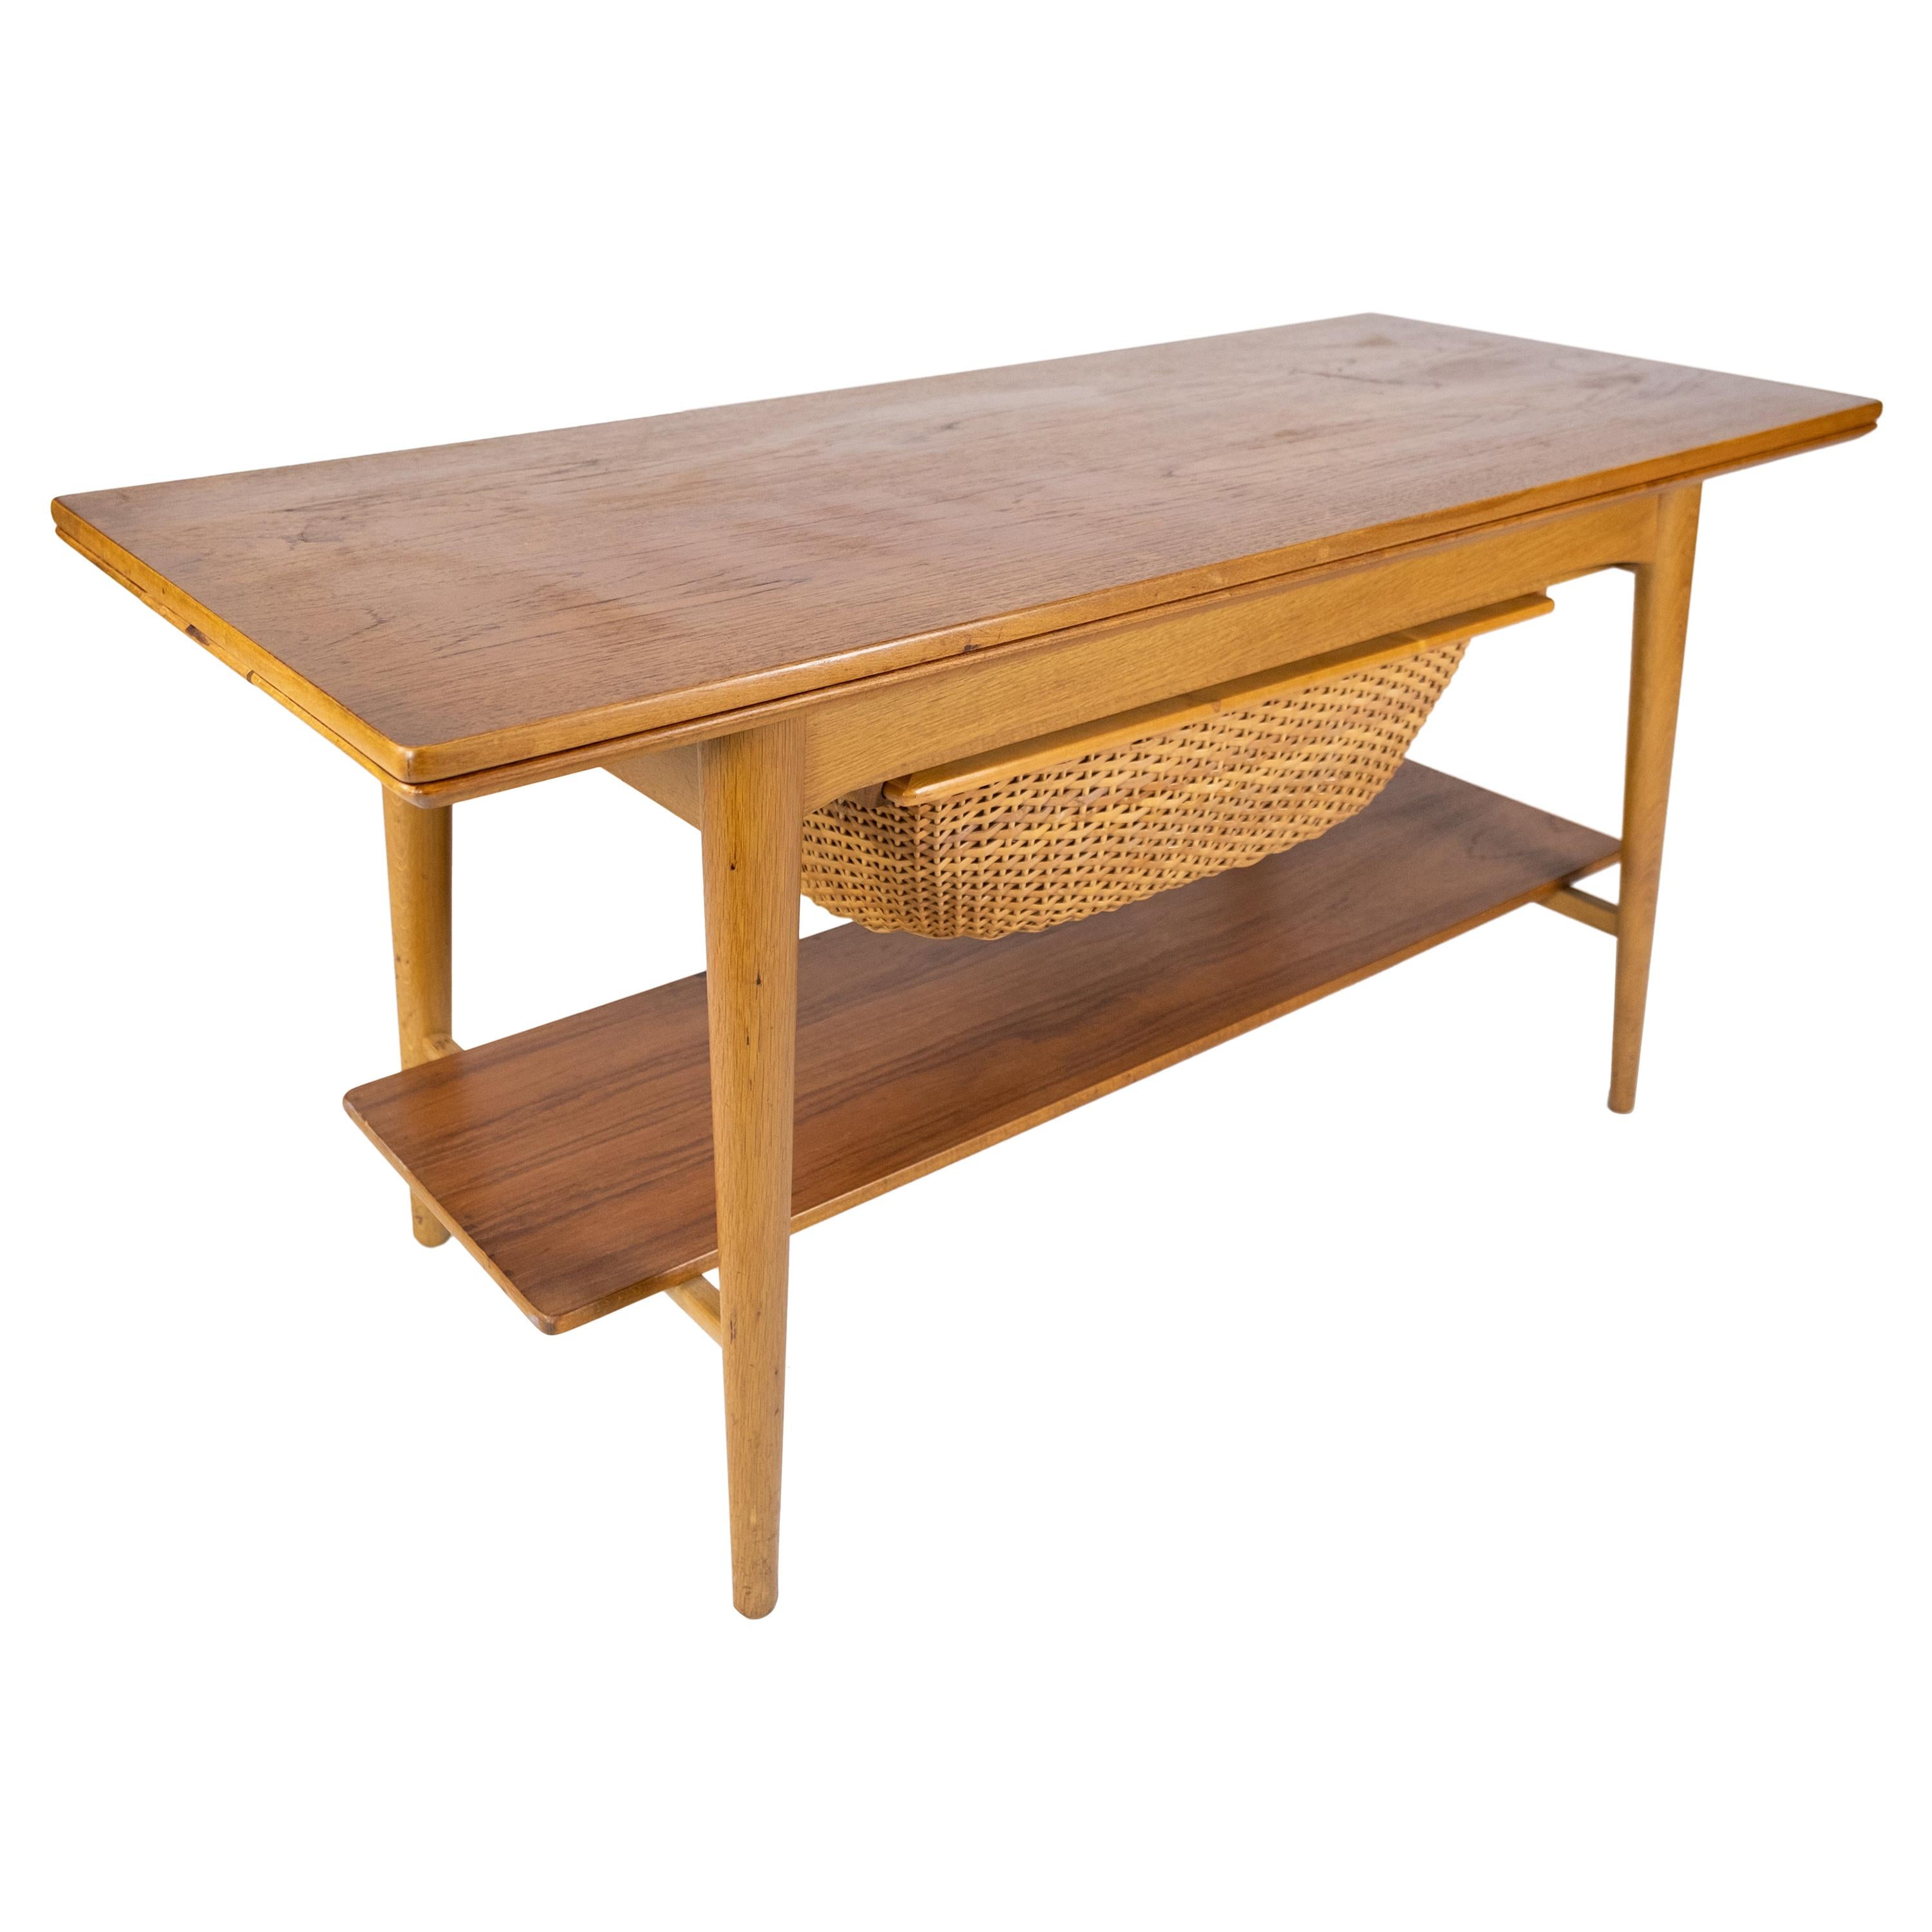 Coffee & Sewing Table Made In Oak & Teak, Danish Design From 1960s For Sale